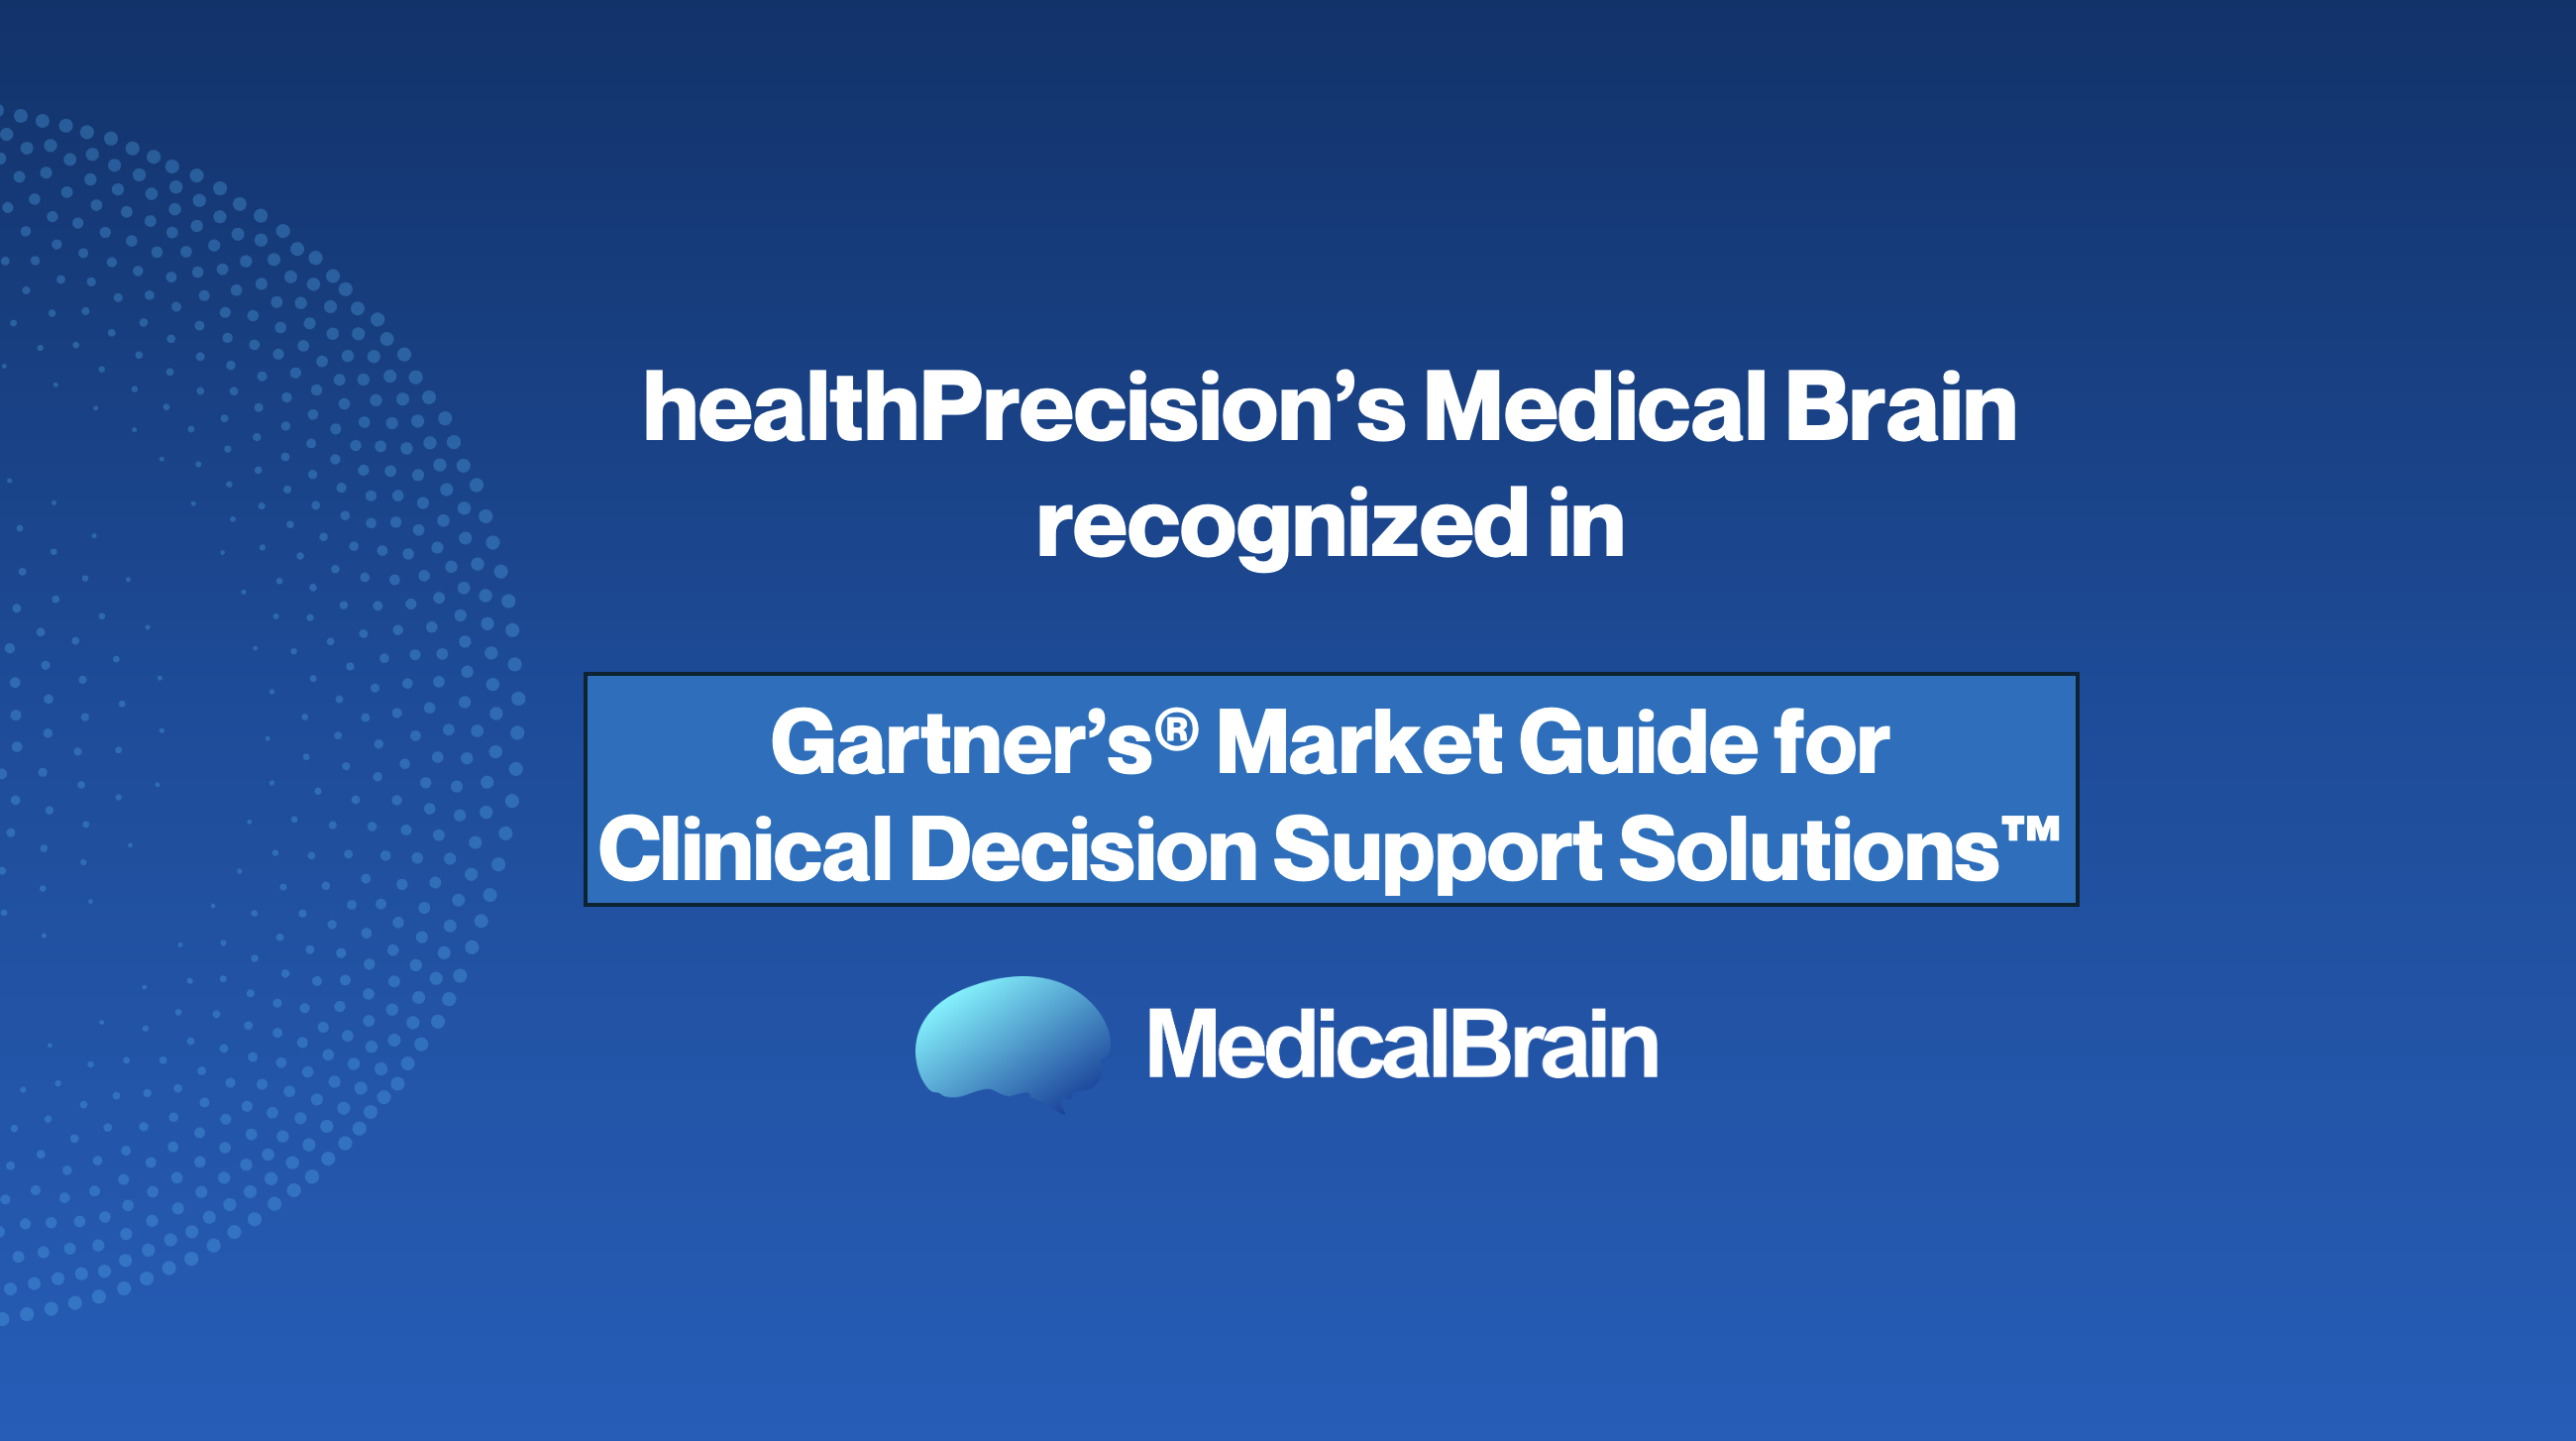 healthPrecision’s Medical Brain recognized by Gartner® in the Market Guide for Clinical Decision Support Solutions™